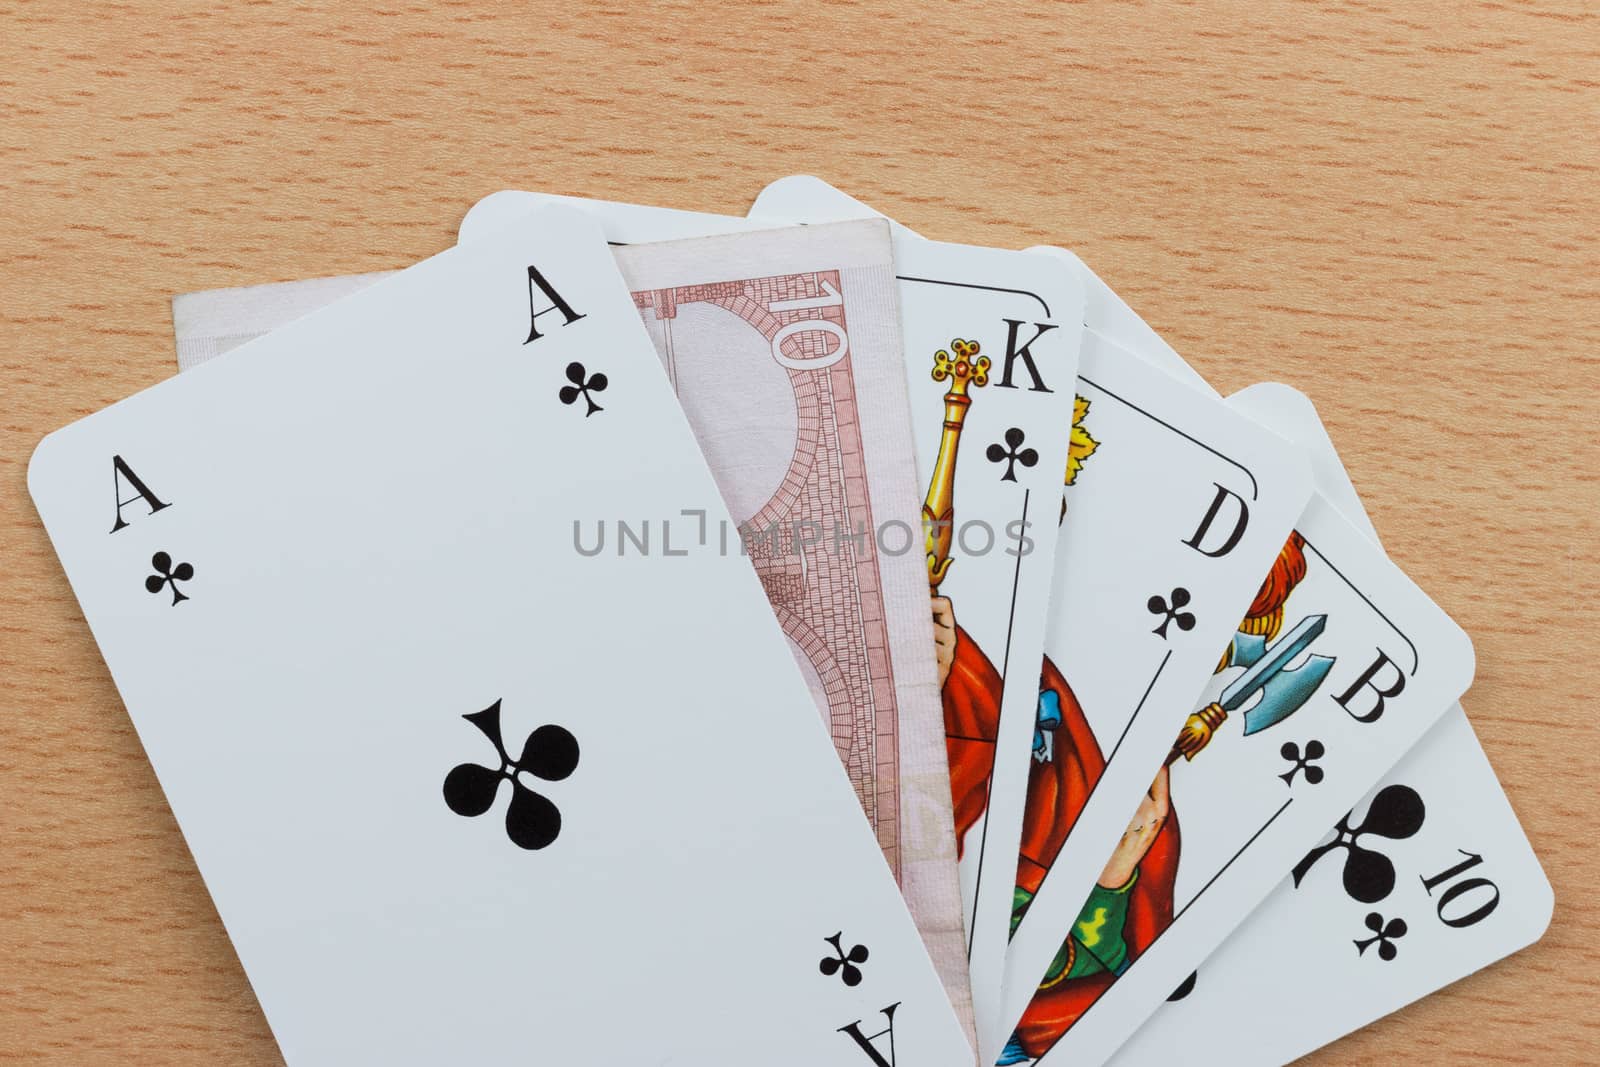 Deck of poker cards showing a Royal Flush with a Euro note